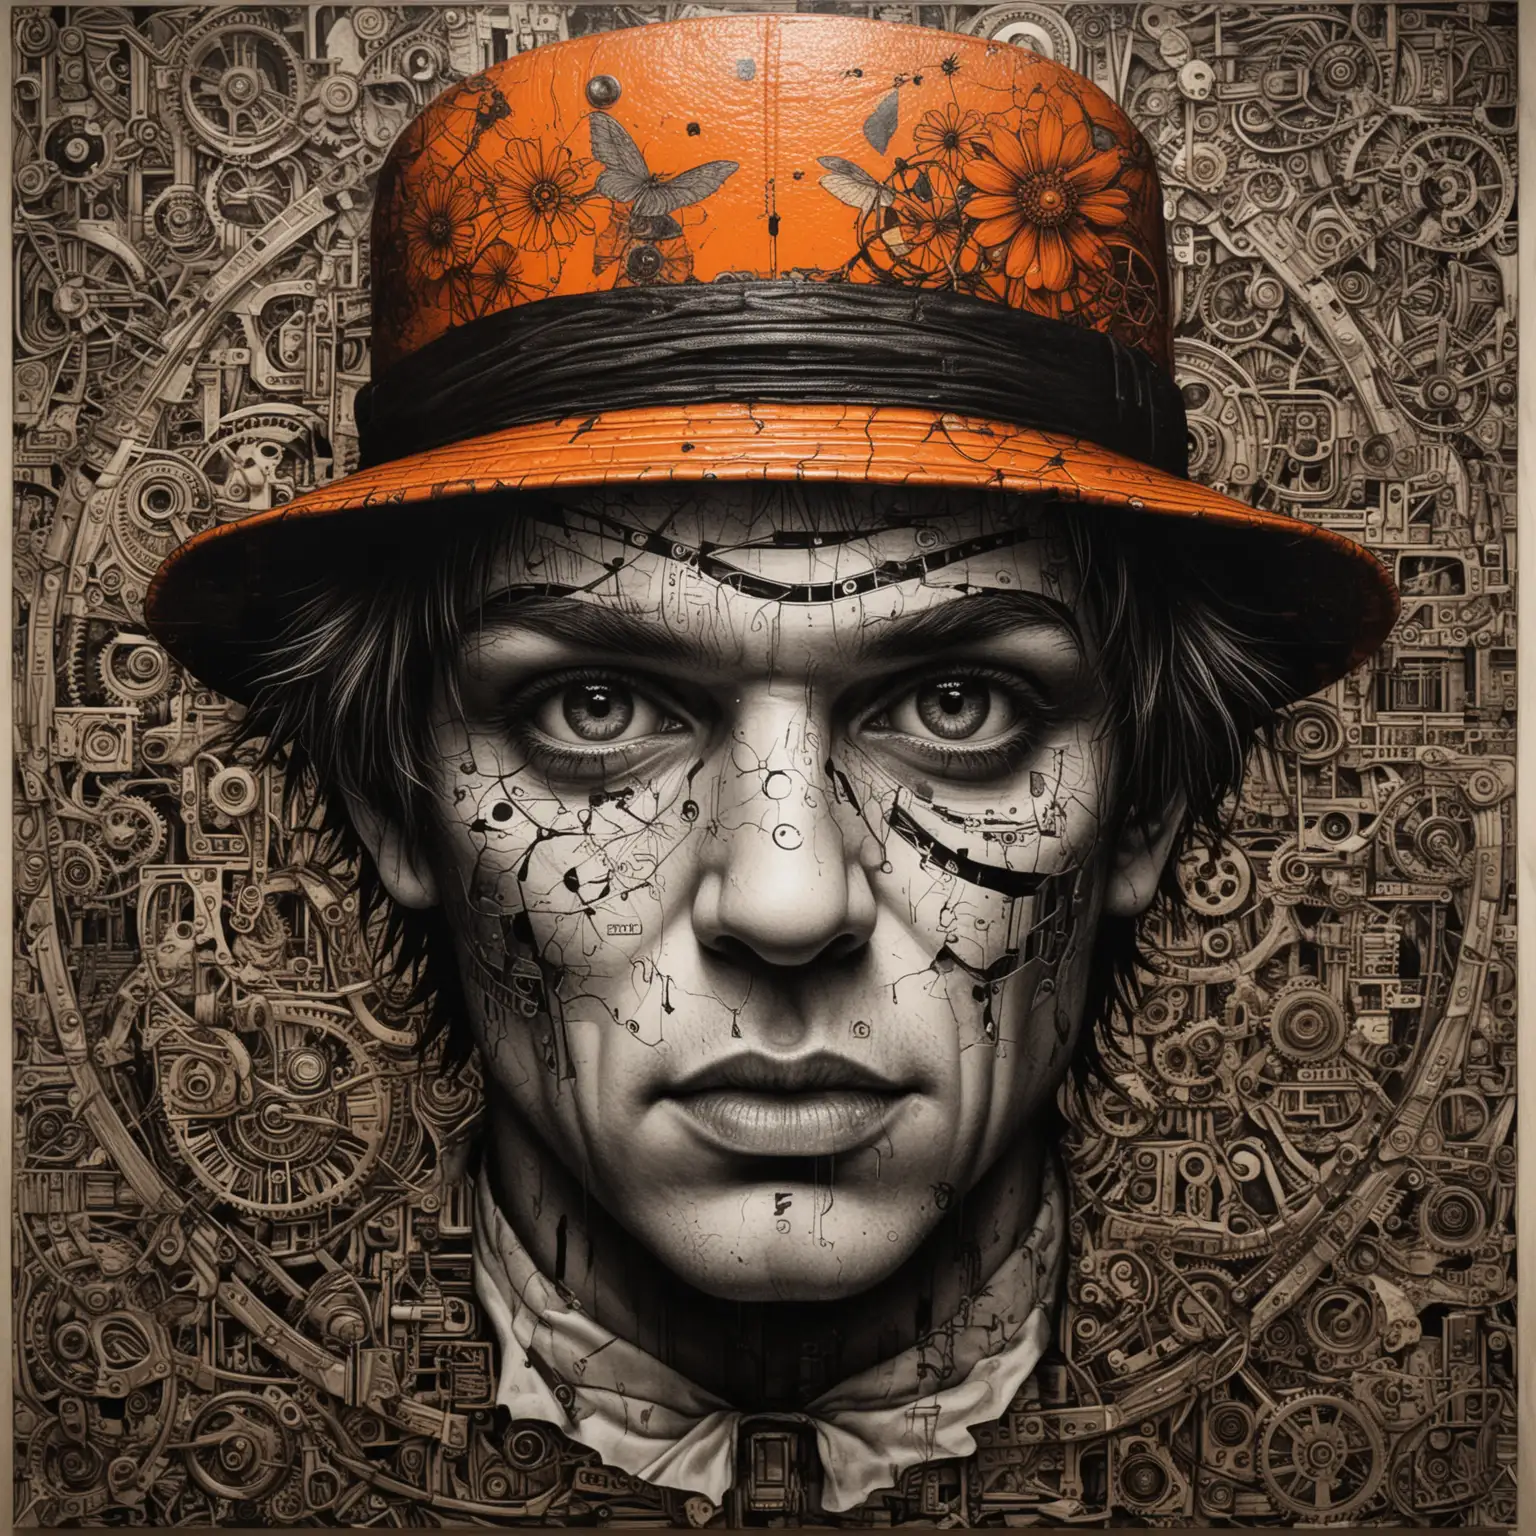 Zio Ziegler Clockwork Orange Art Abstract Portrait with Intricate Patterns and Vibrant Colors